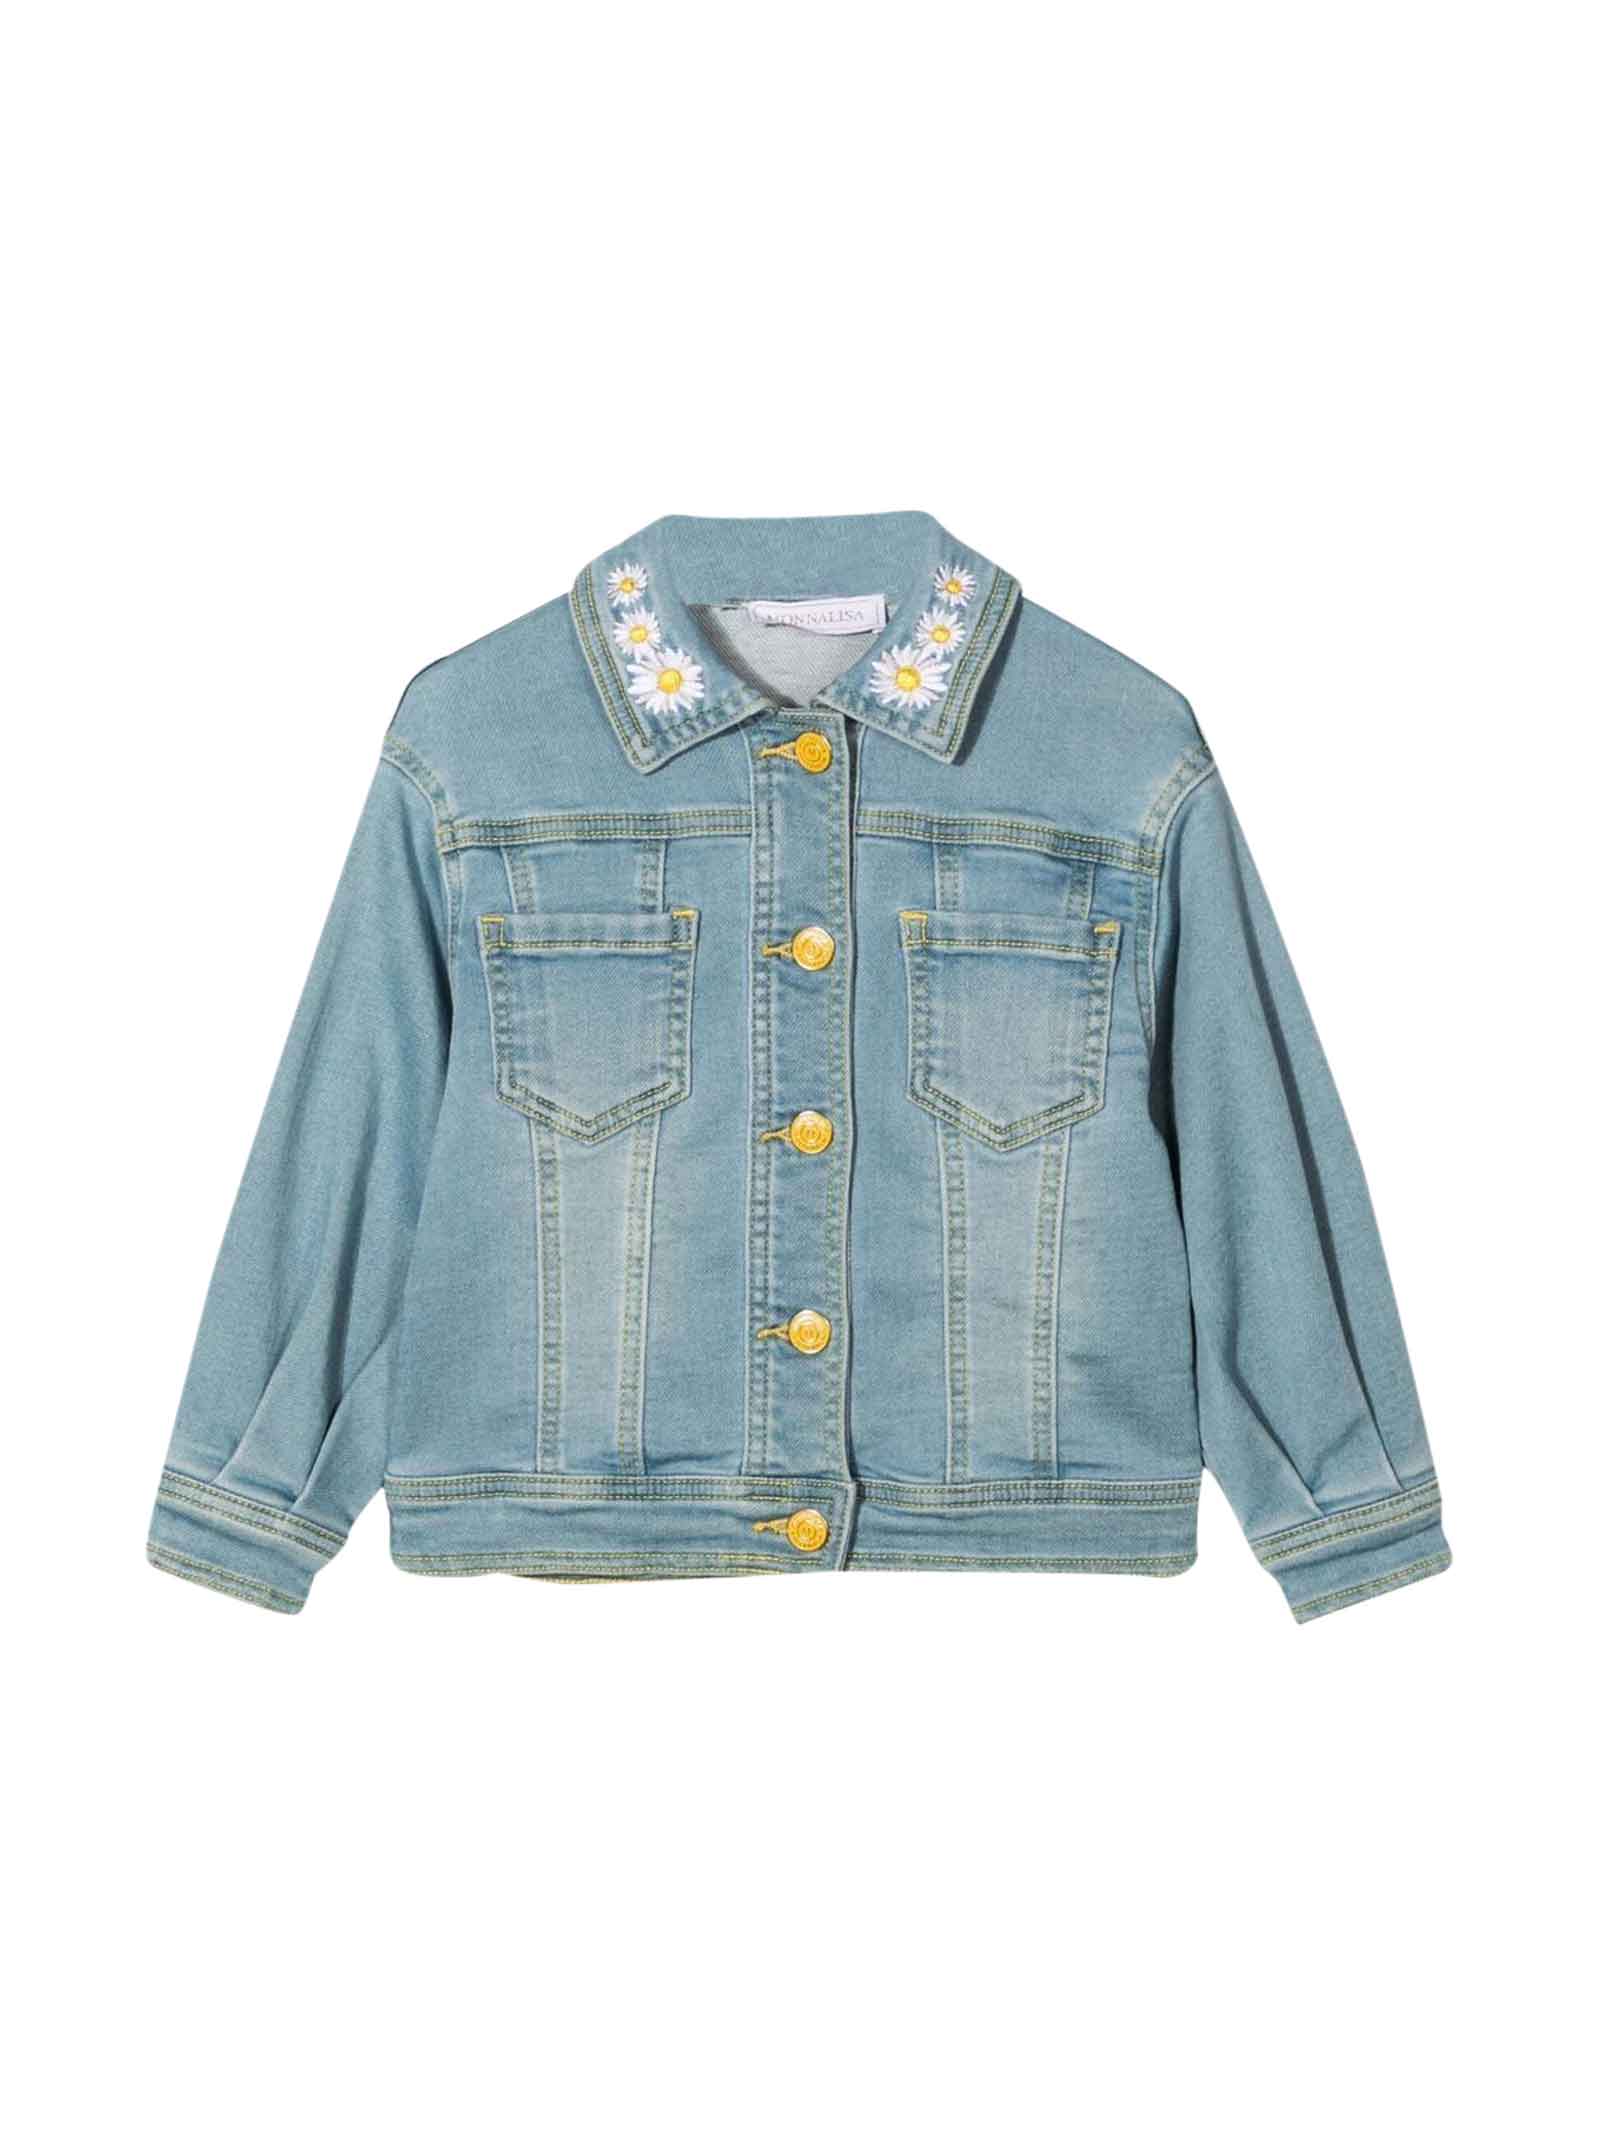 Monnalisa Denim Jacket With Floreal Applications On The Neck And Back Tweety Bird Application